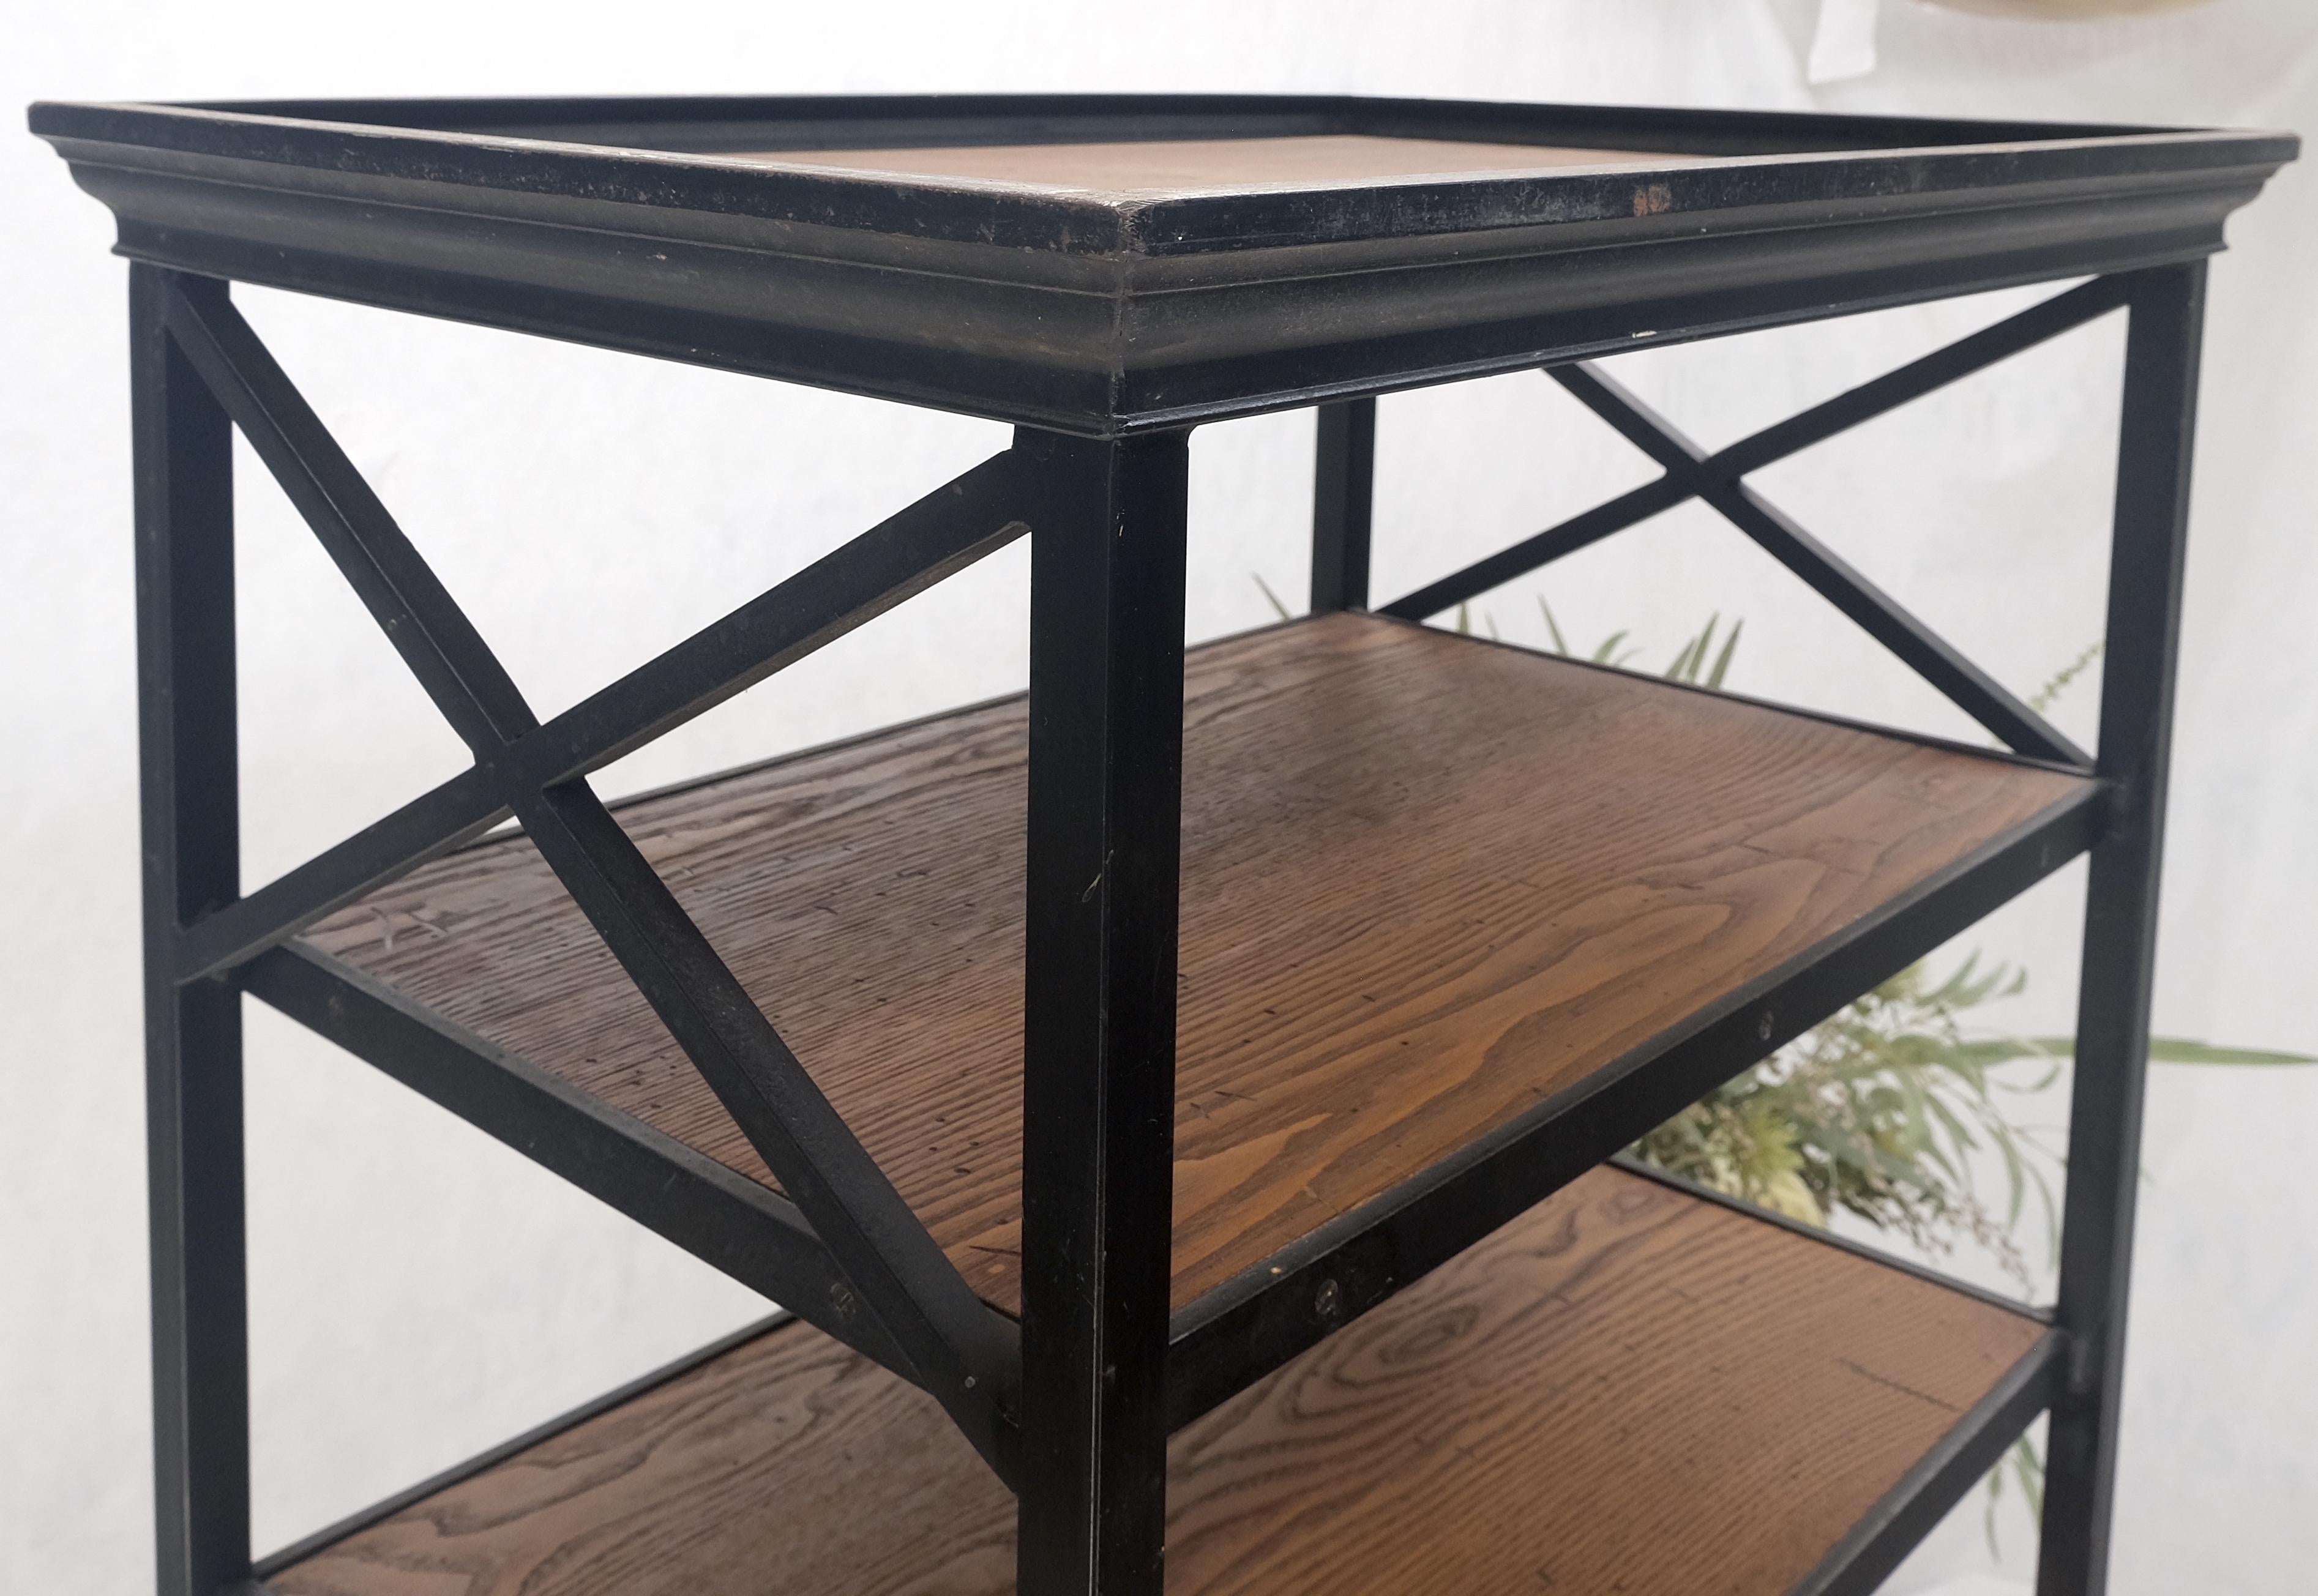 20th Century Black Steel & Wormy Chestnut Shelves 8 Foot Tall Etagere BookCase Display MINT For Sale